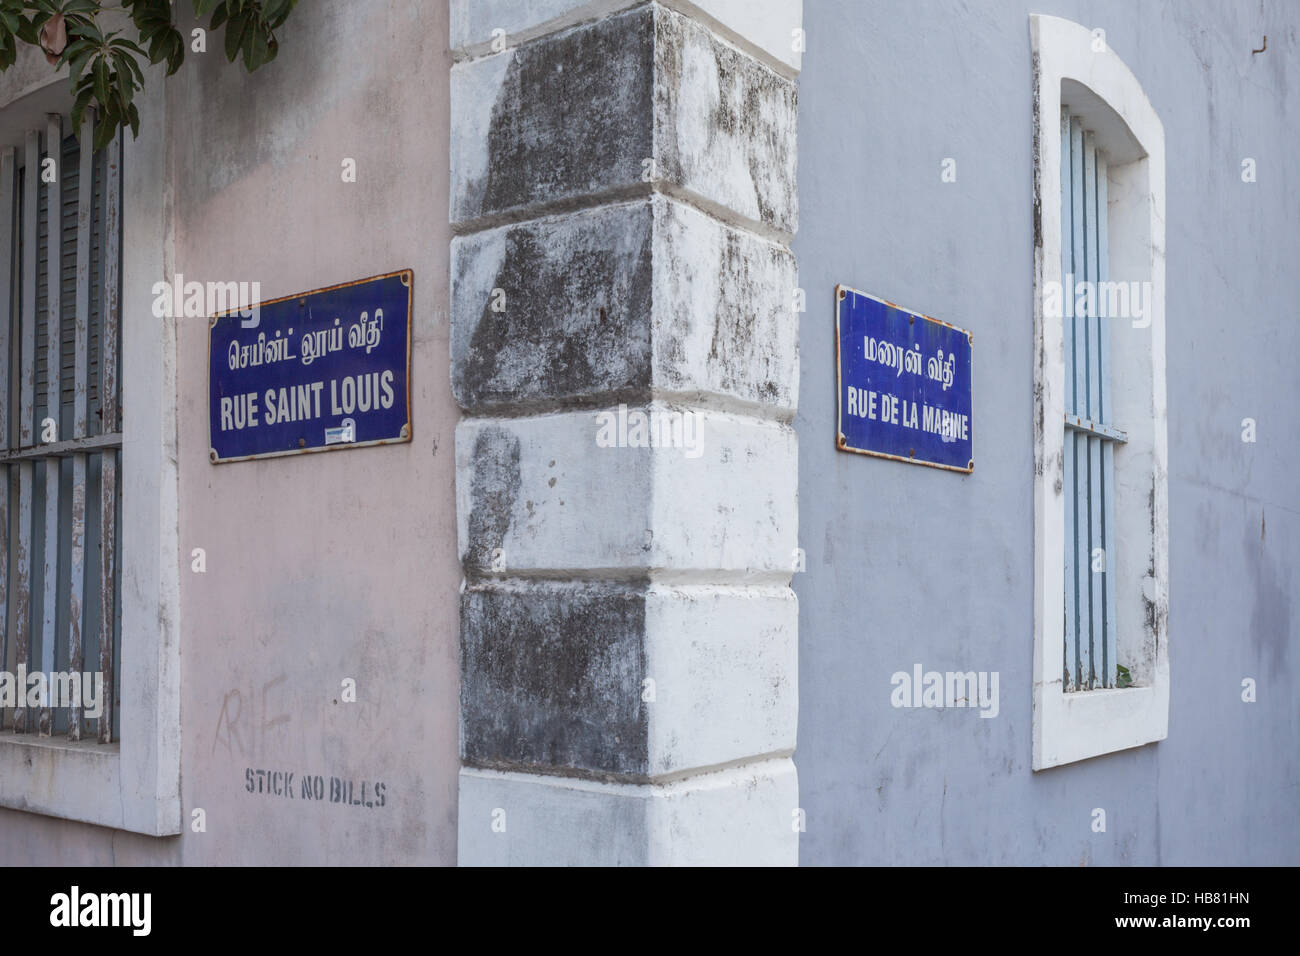 Street corner signs showing English and French (colonial heritage) names on signs, Pondicherry, Puducherry, India Stock Photo